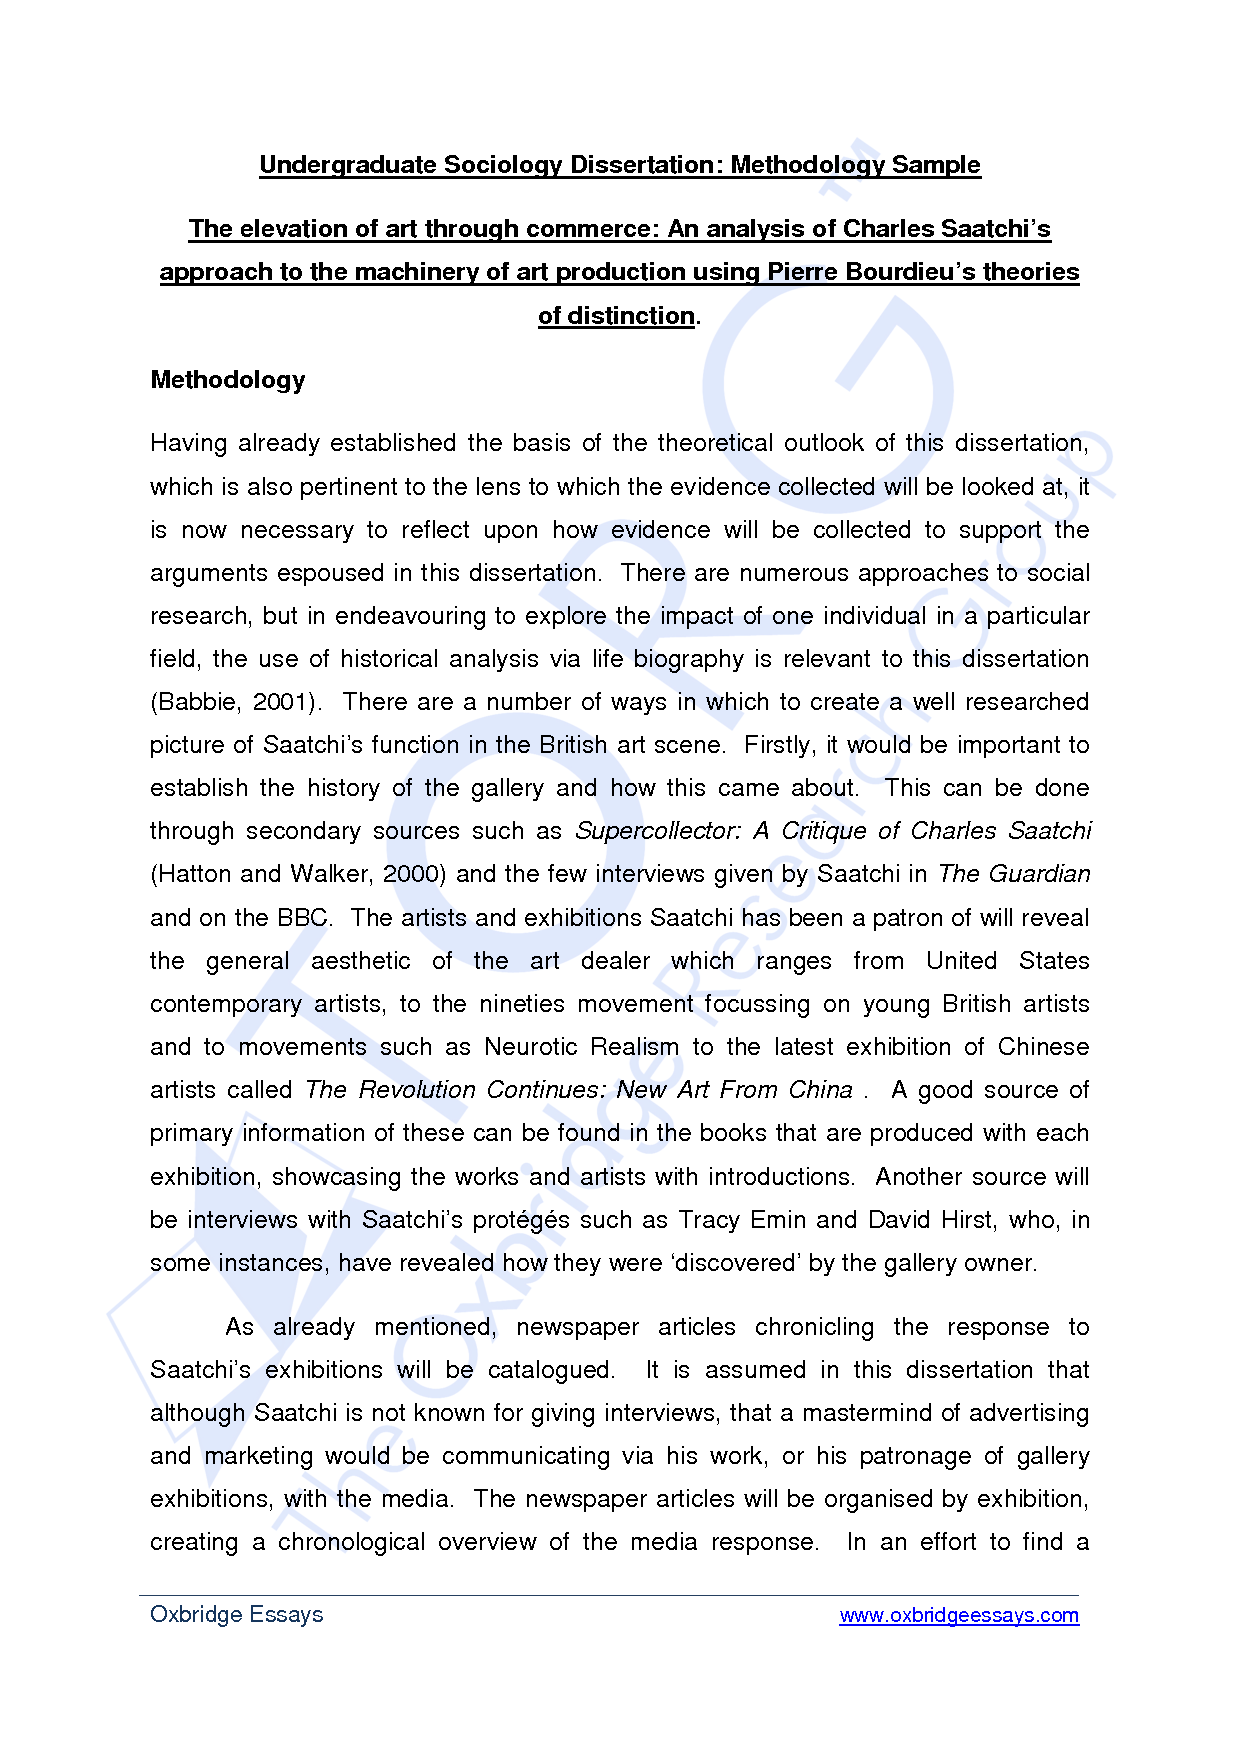 How to write an interdisciplinary research paper excellant resume